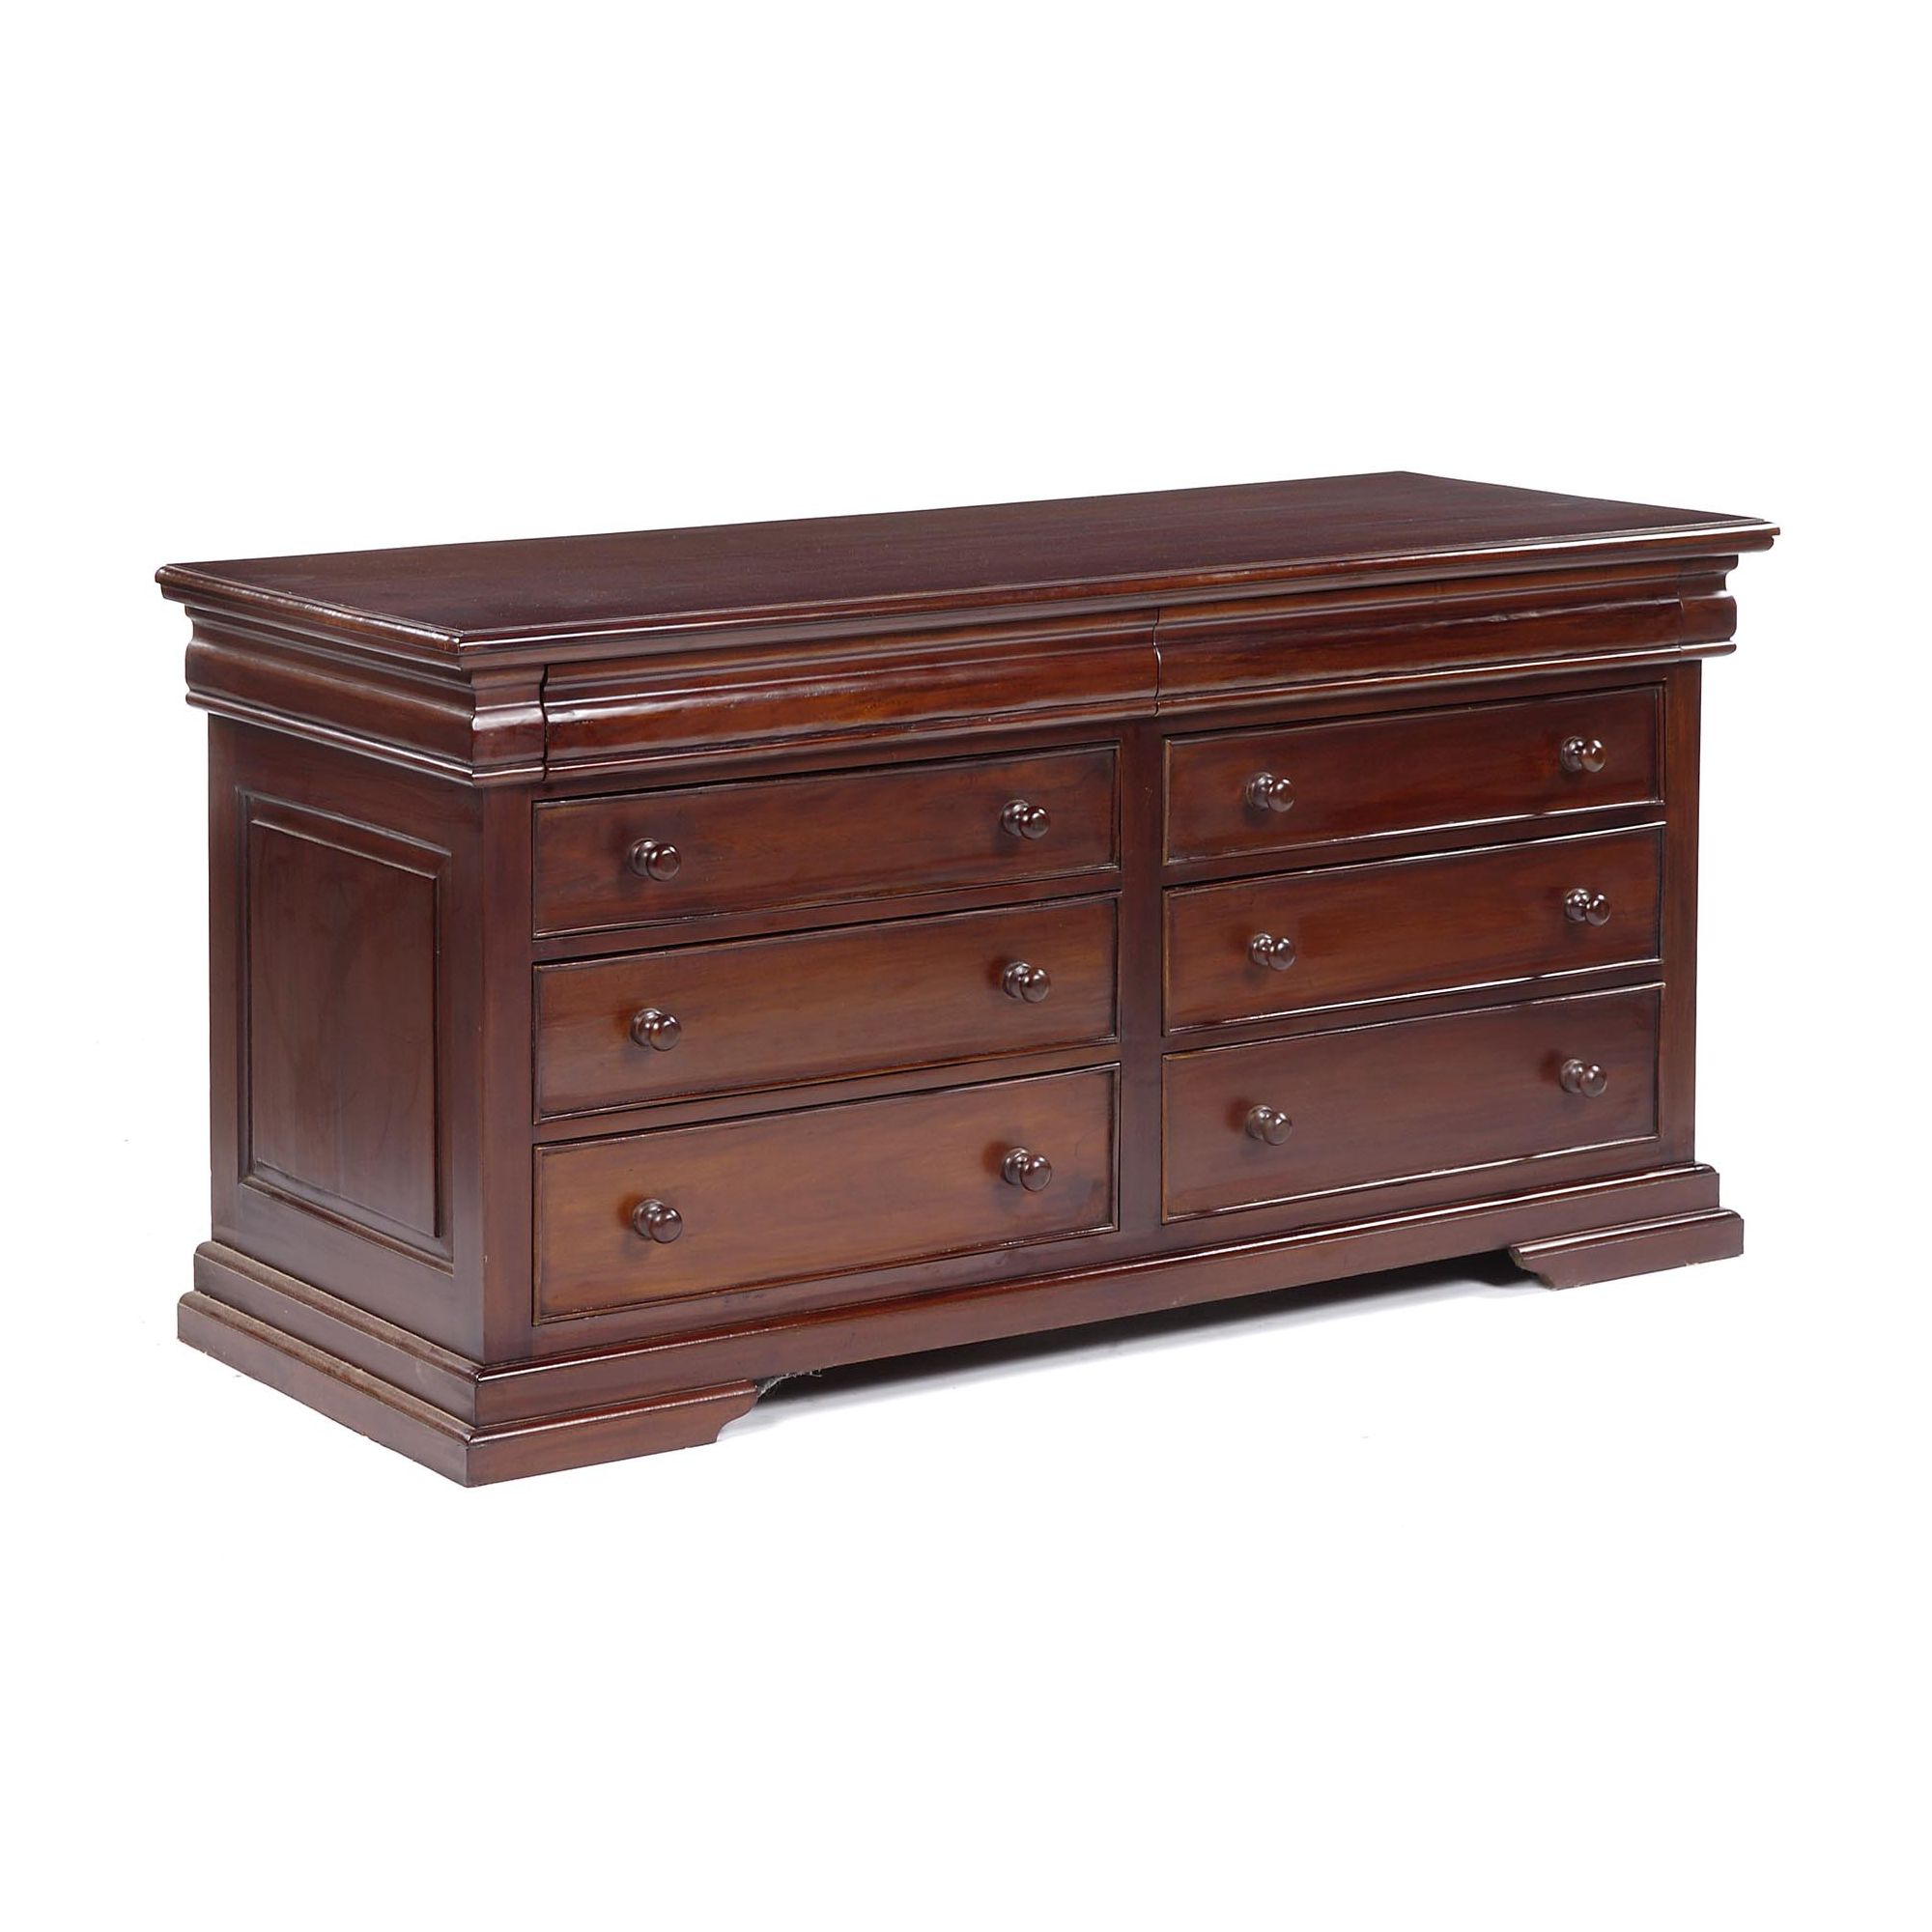 Anderson Bradshaw Colonial Eight Drawer Chest in Mahogany at Tesco Direct